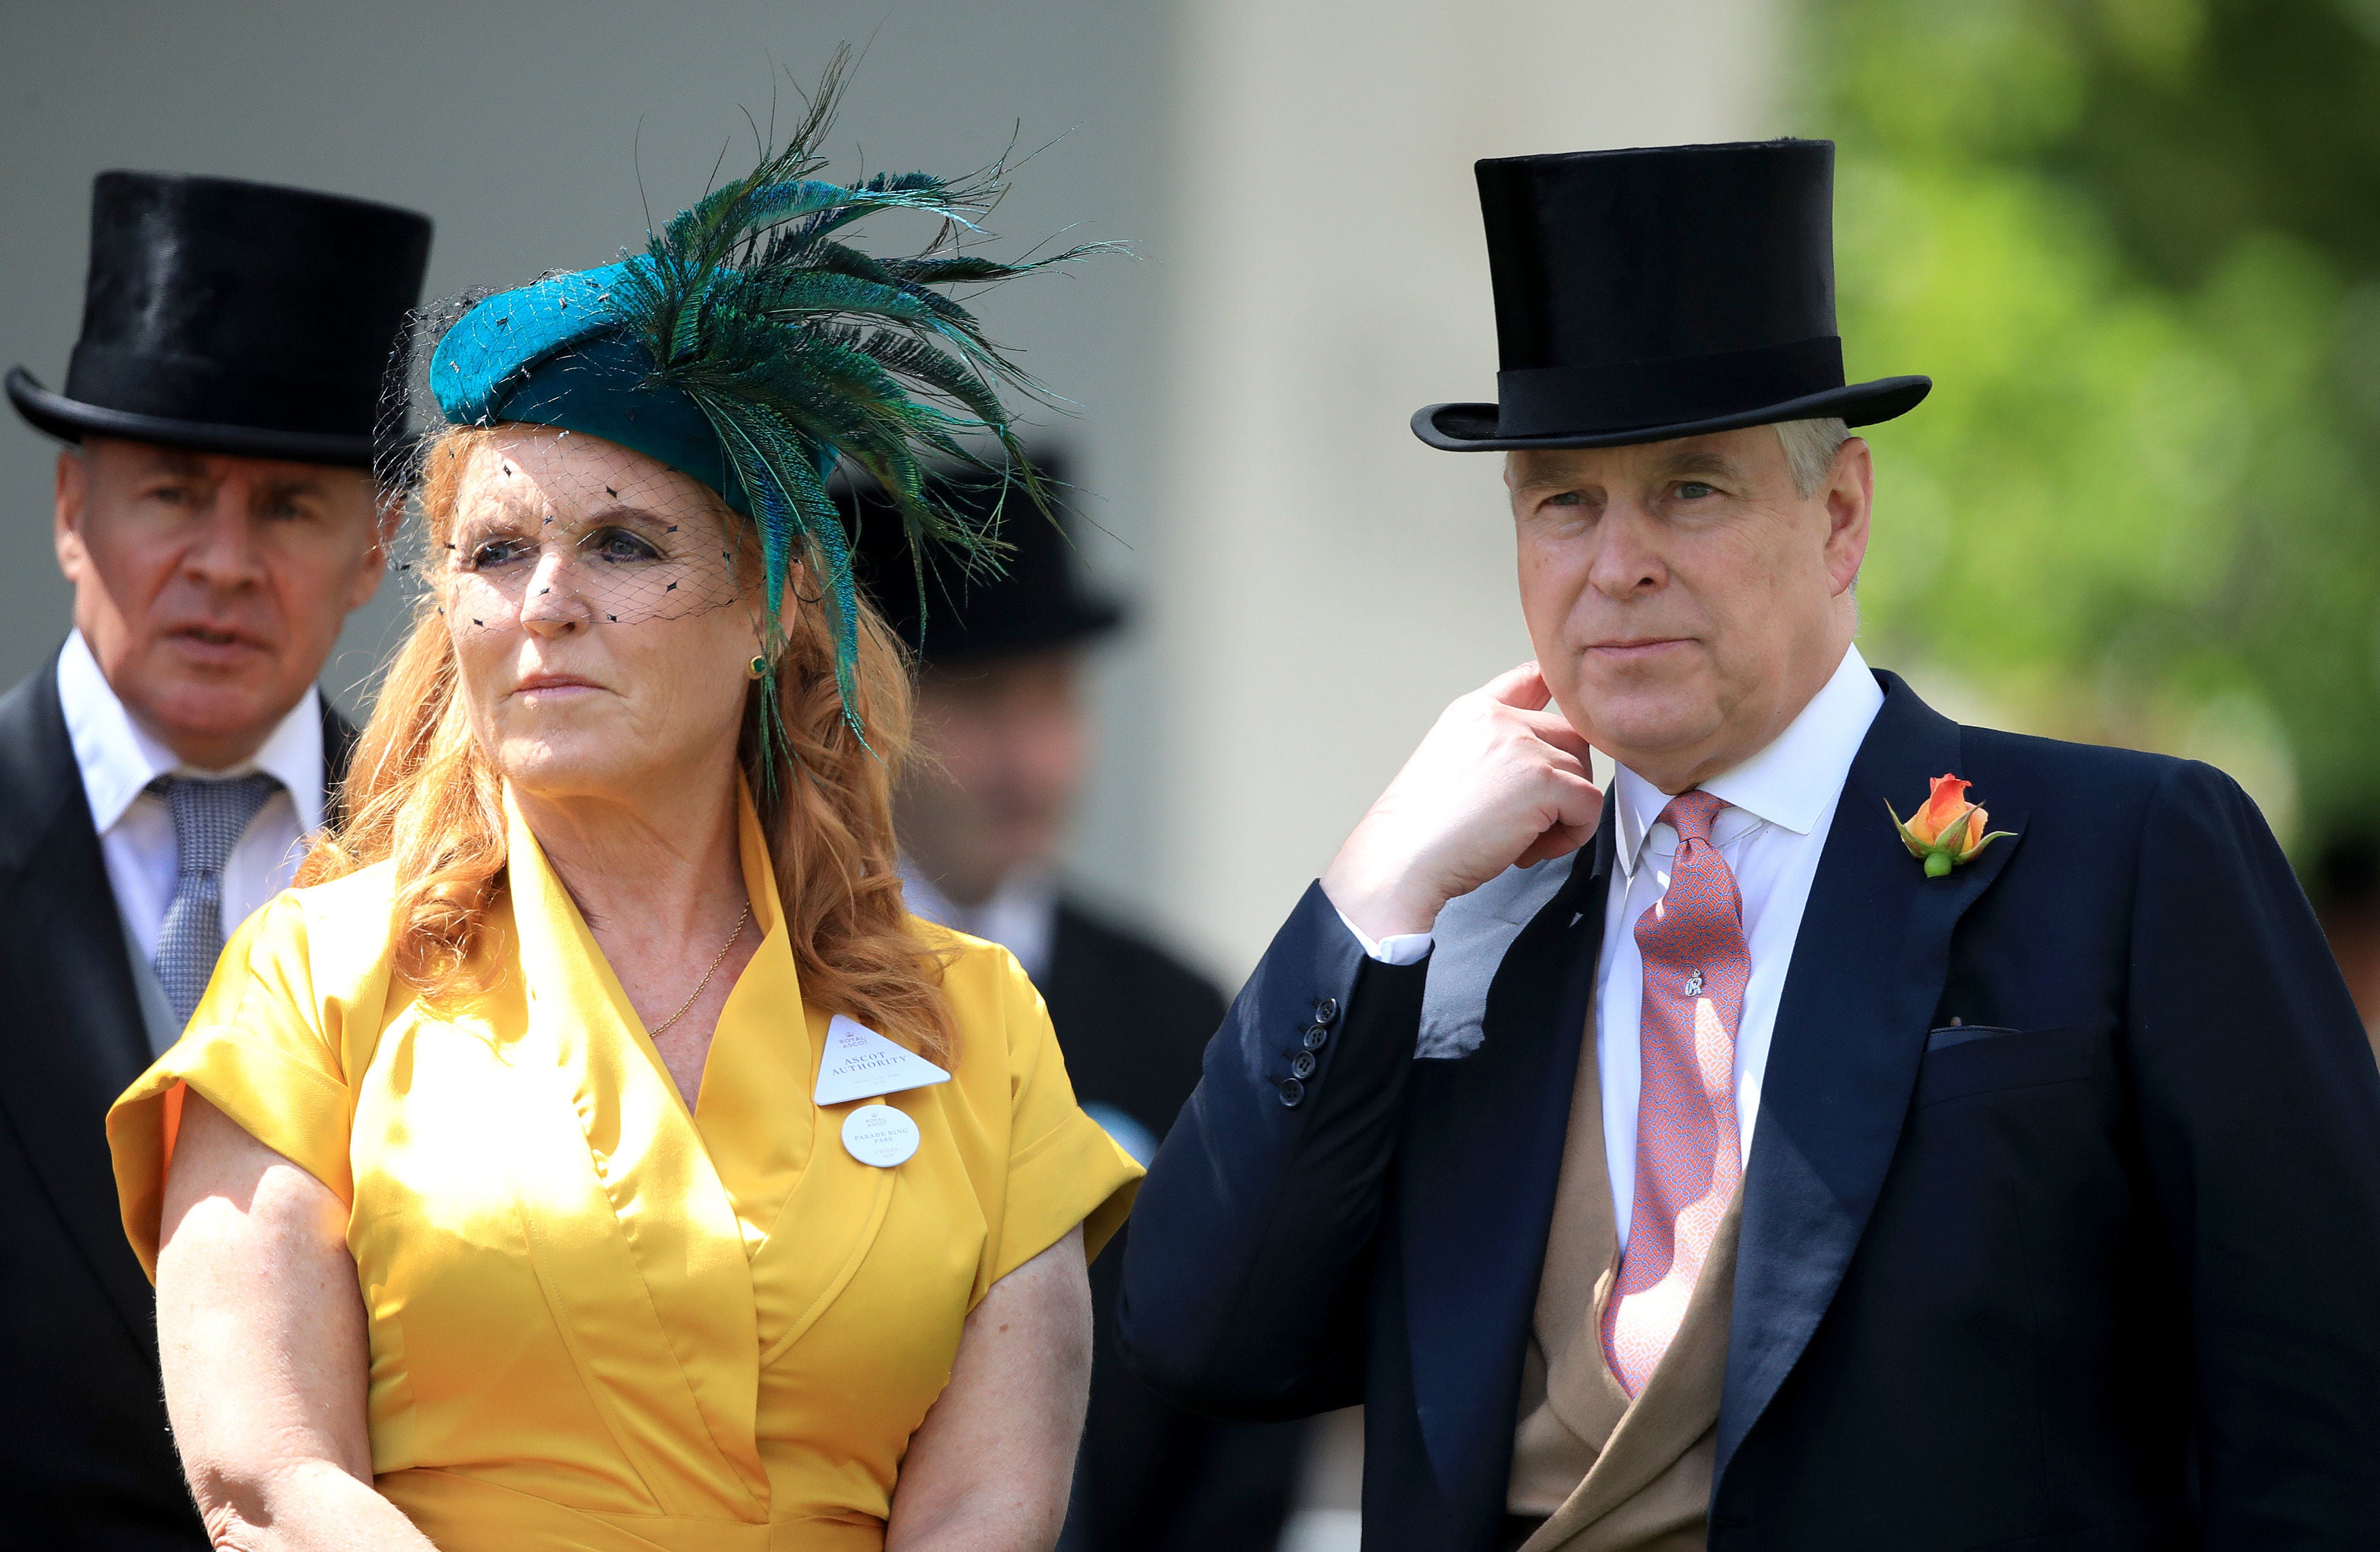 A judge was told that "substantial sums" had been paid to Sarah, Duchess of York and the Duke of York